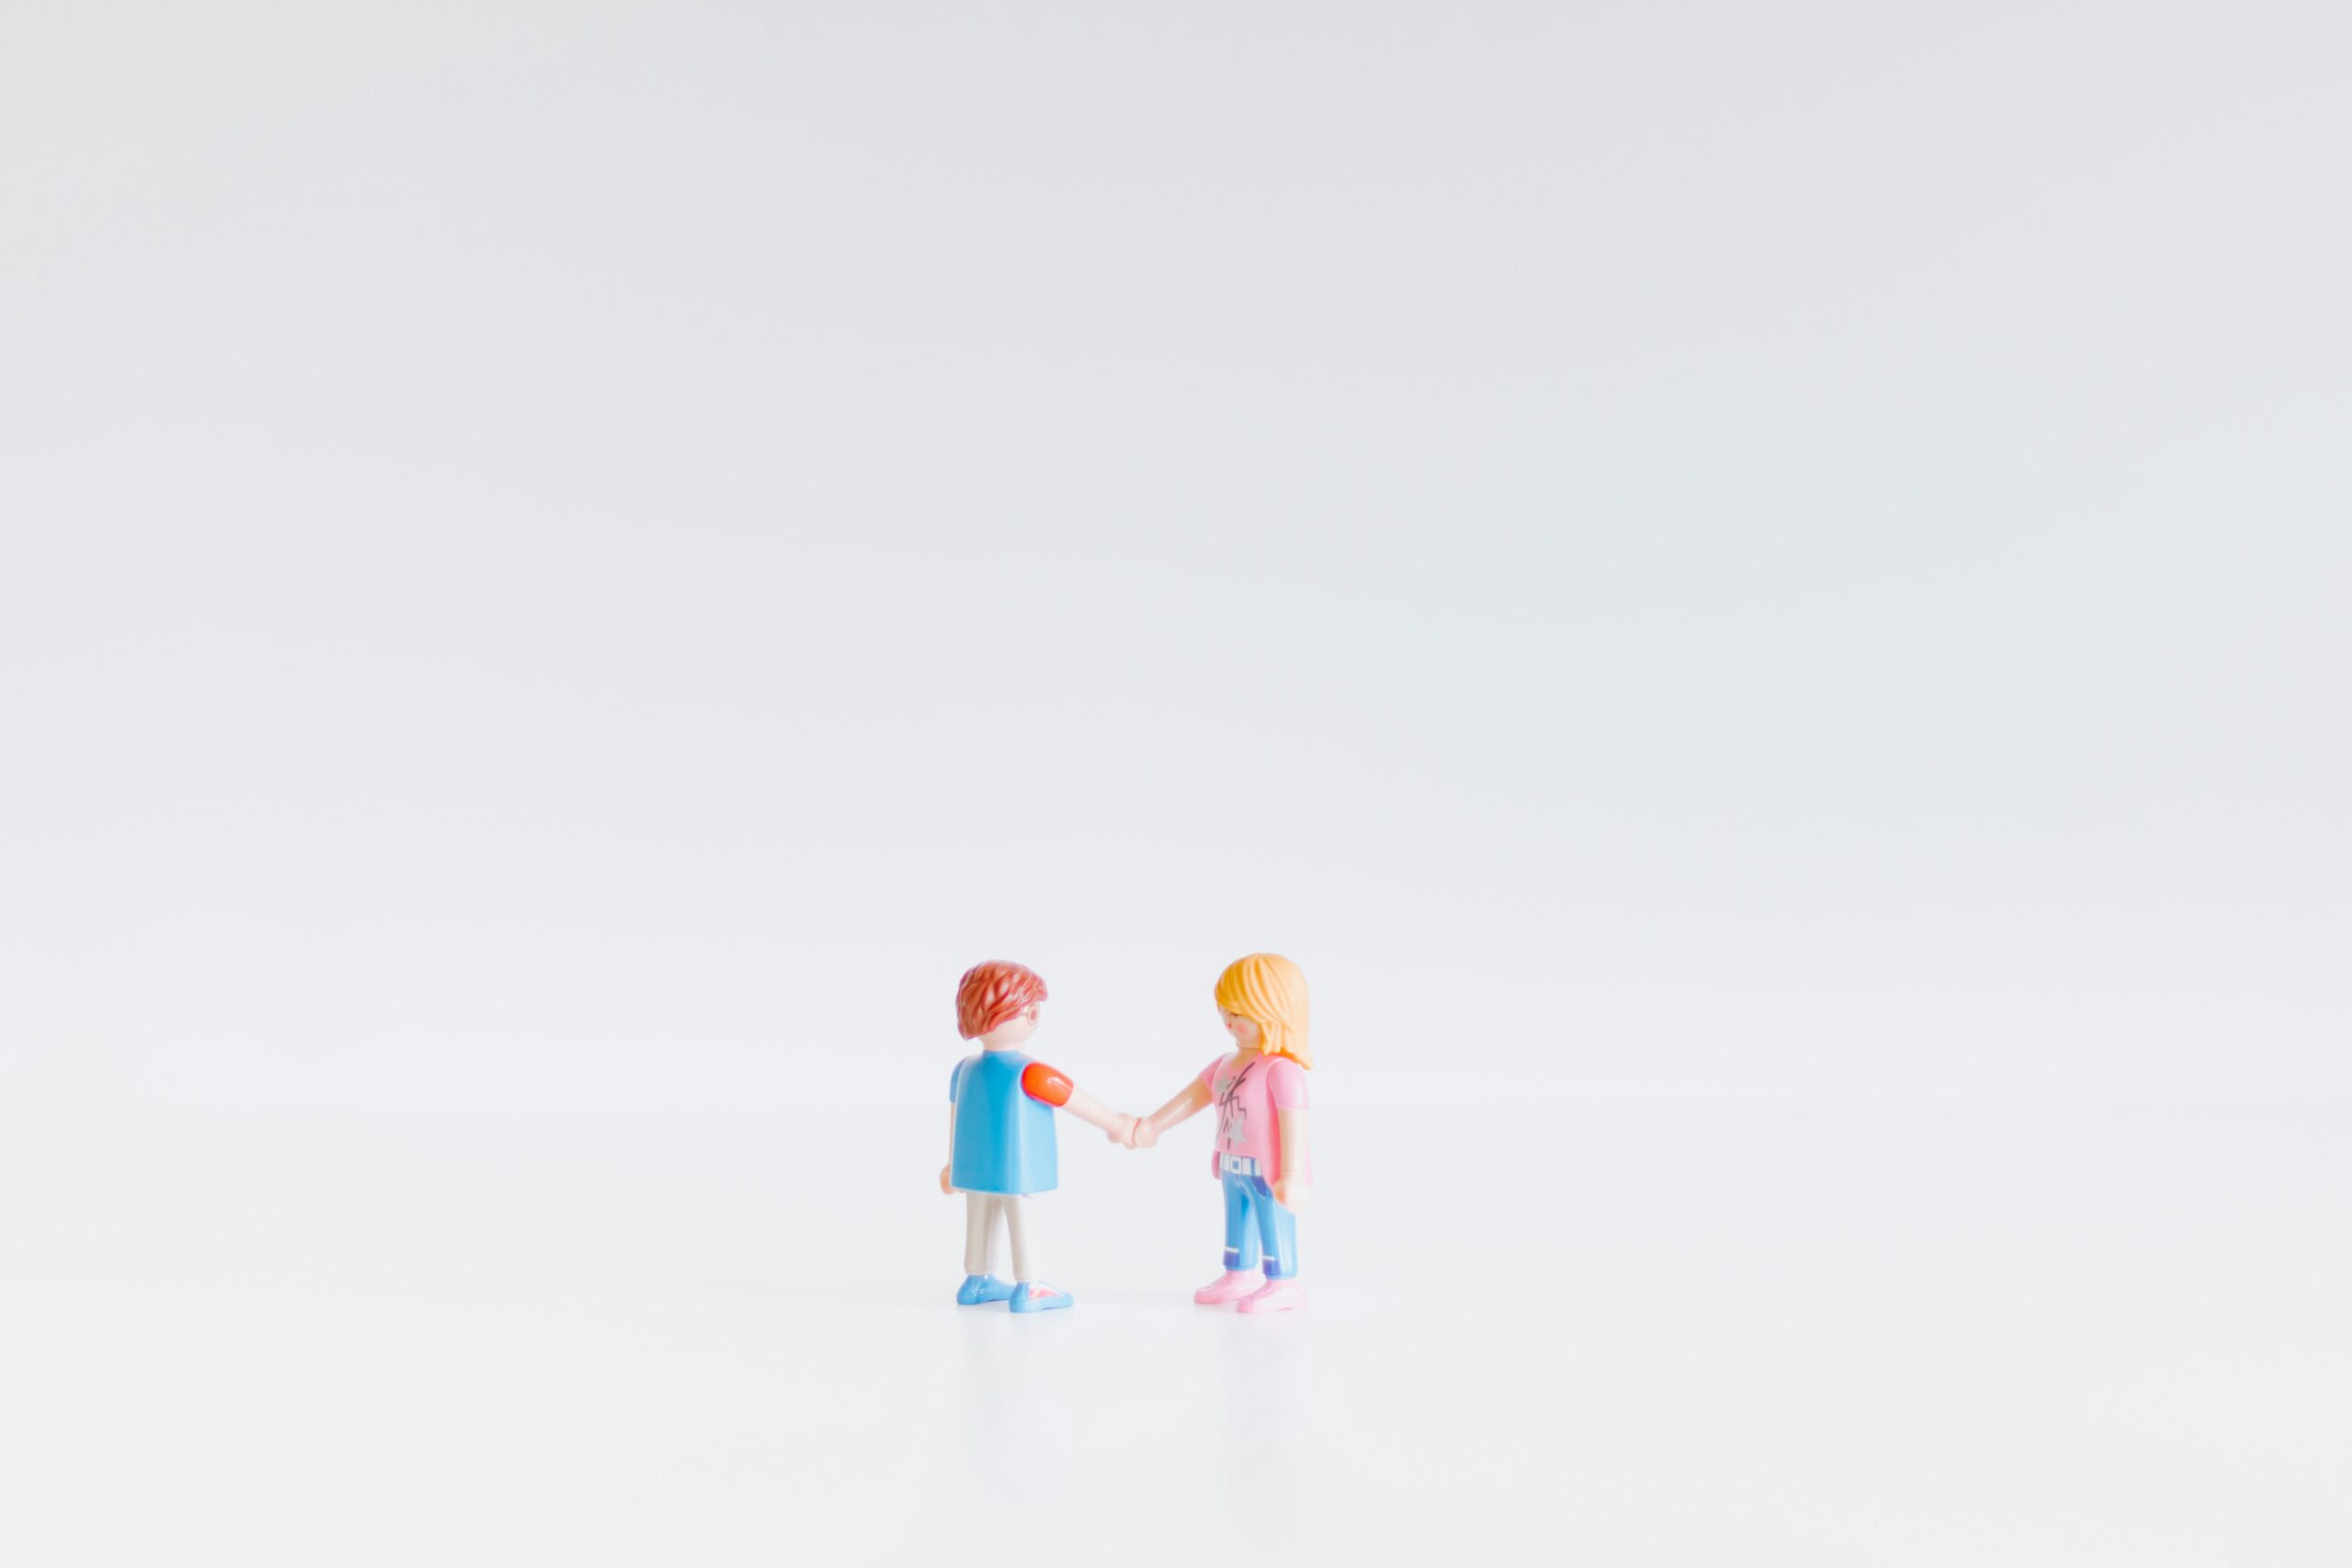 Two toy figures shaking hands in agreement.